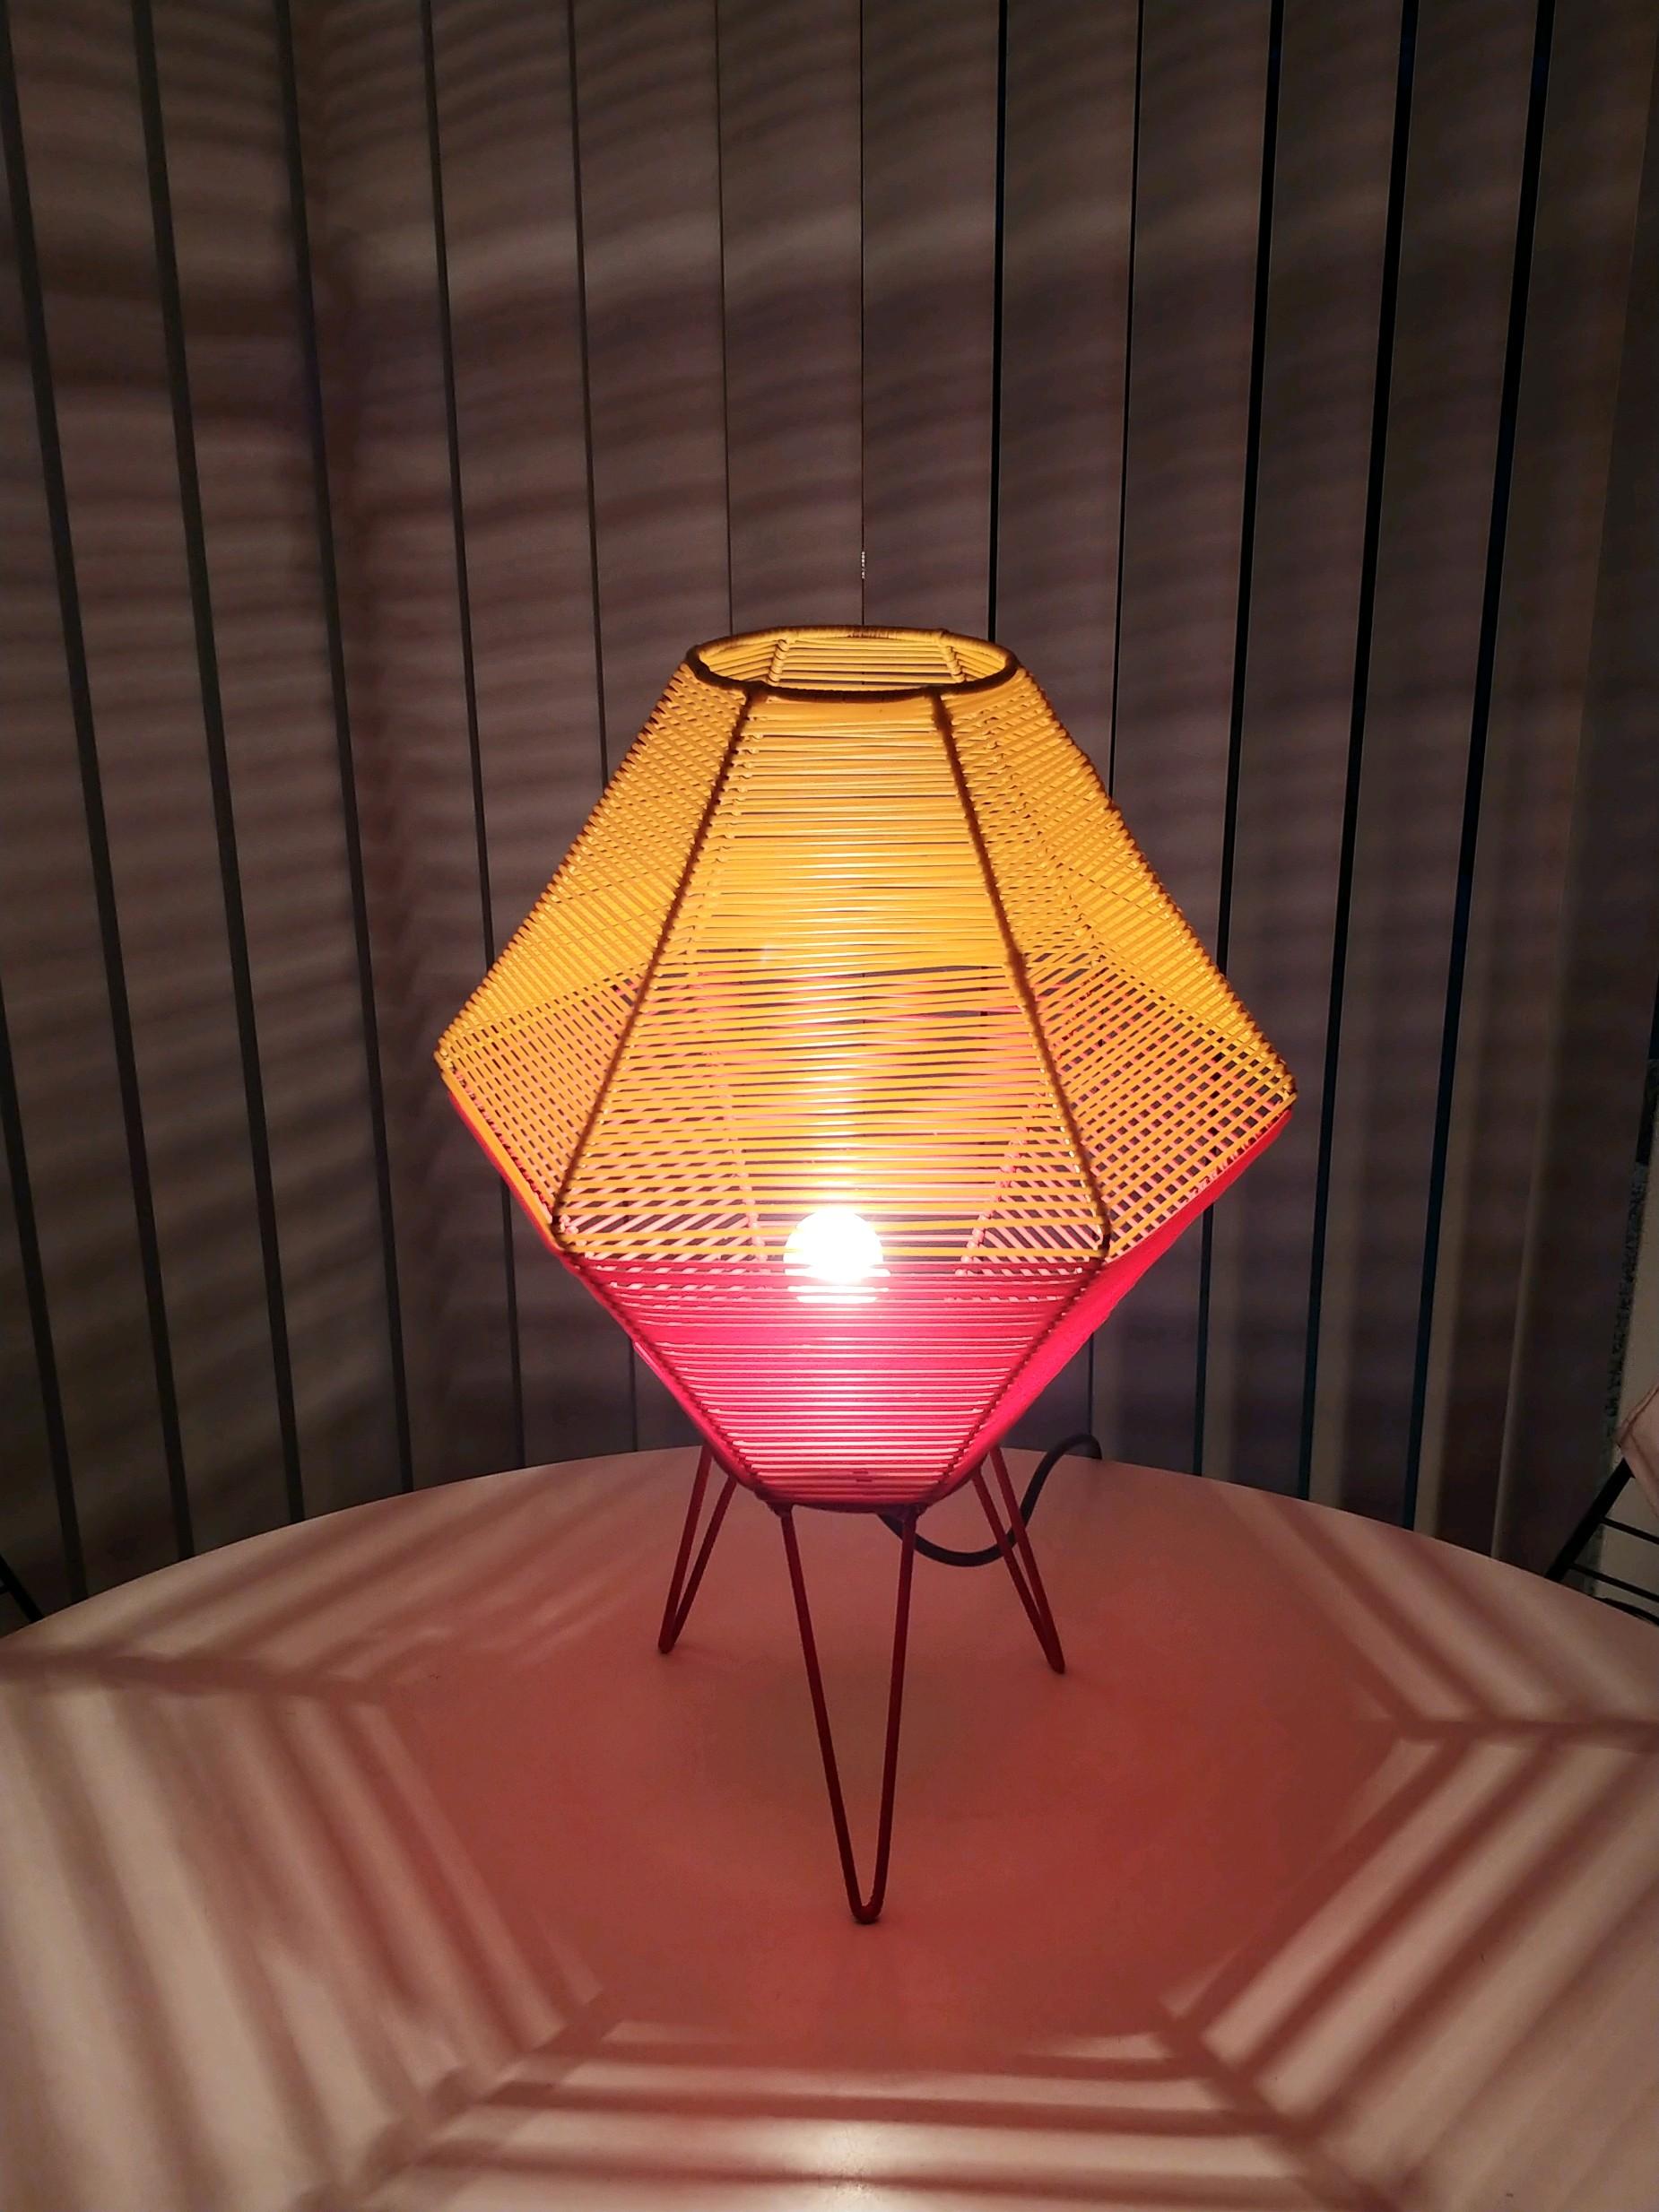 This wire frame lamp with hairpin legs is wound with red and yellow nylon cord. When used with a clear bulb the light creates patterns on the table and on the walls. Nylon cord is 100% with no losses or damage. This lamp was found in Germany and is